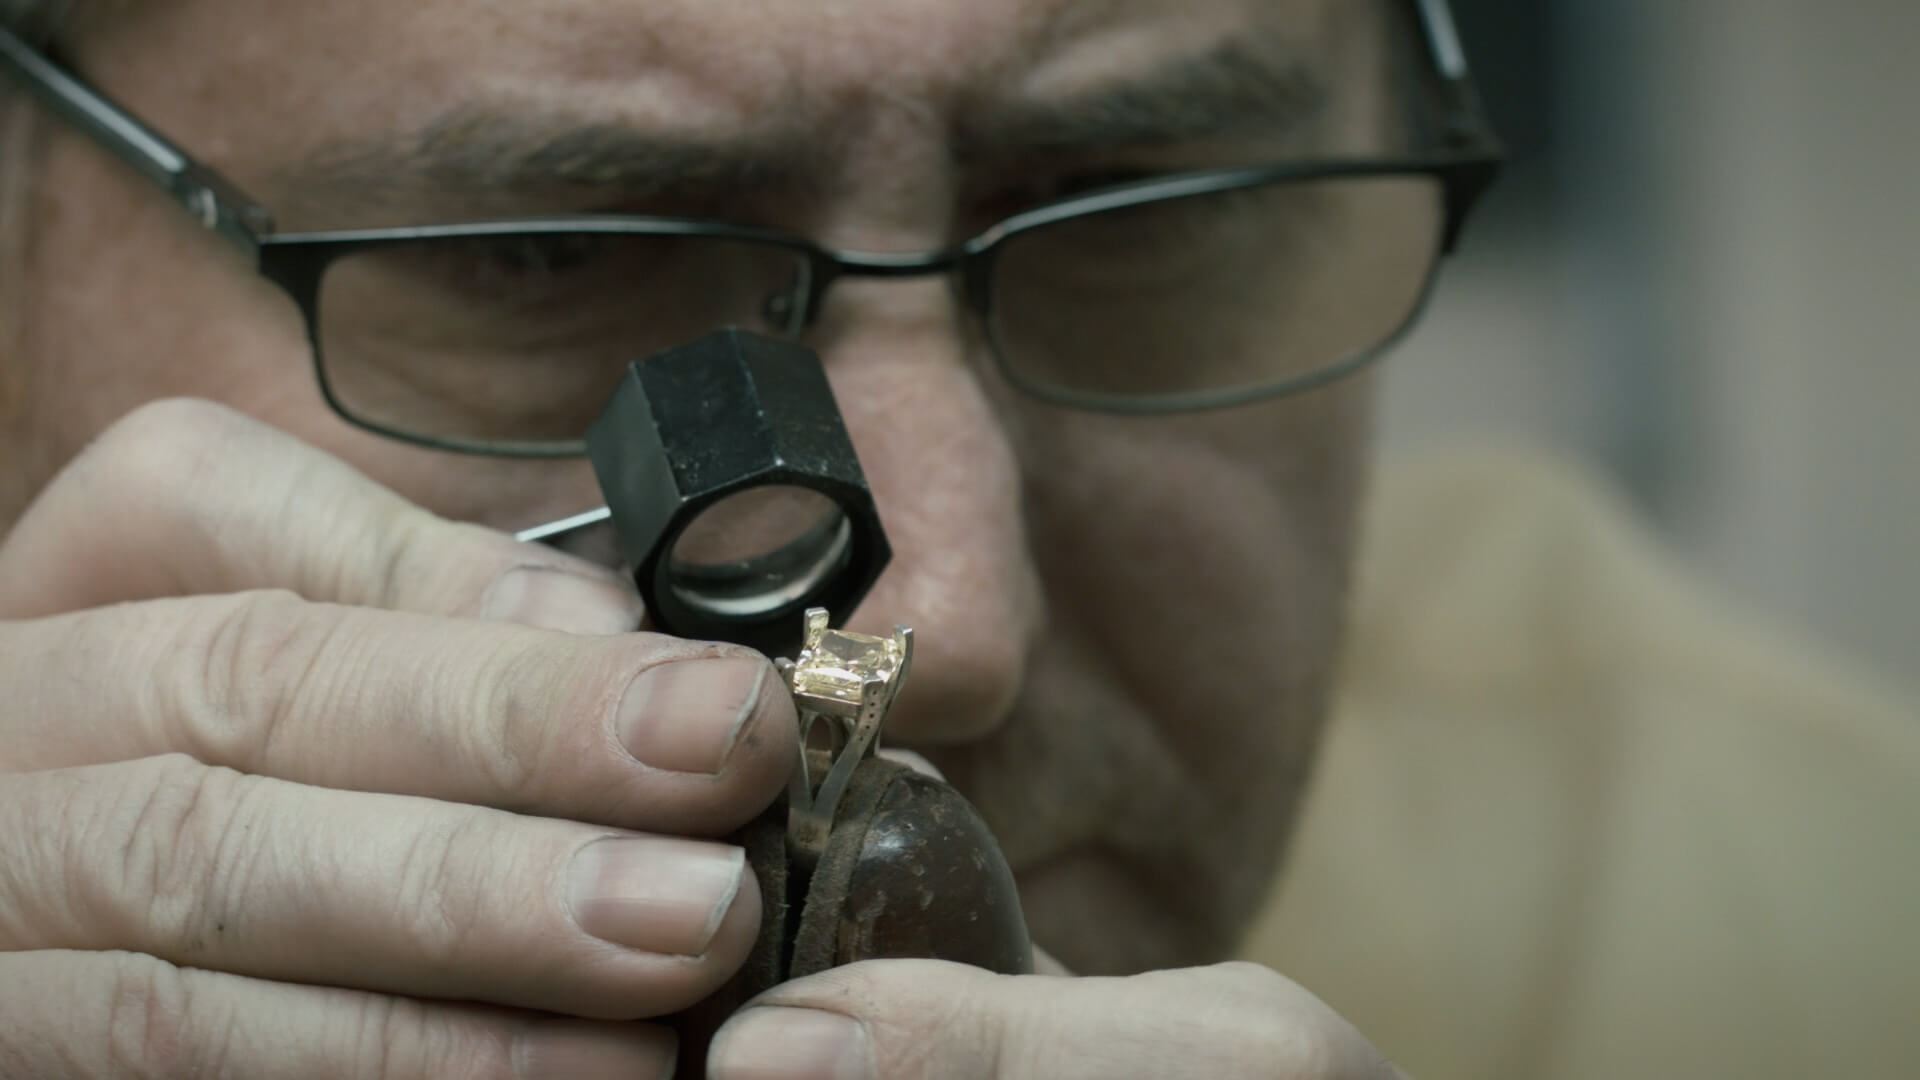 A close-up of a jeweler with glasses and a loupe inspecting a golden ring with a square-cut gemstone, holding it securely with a metal tool.